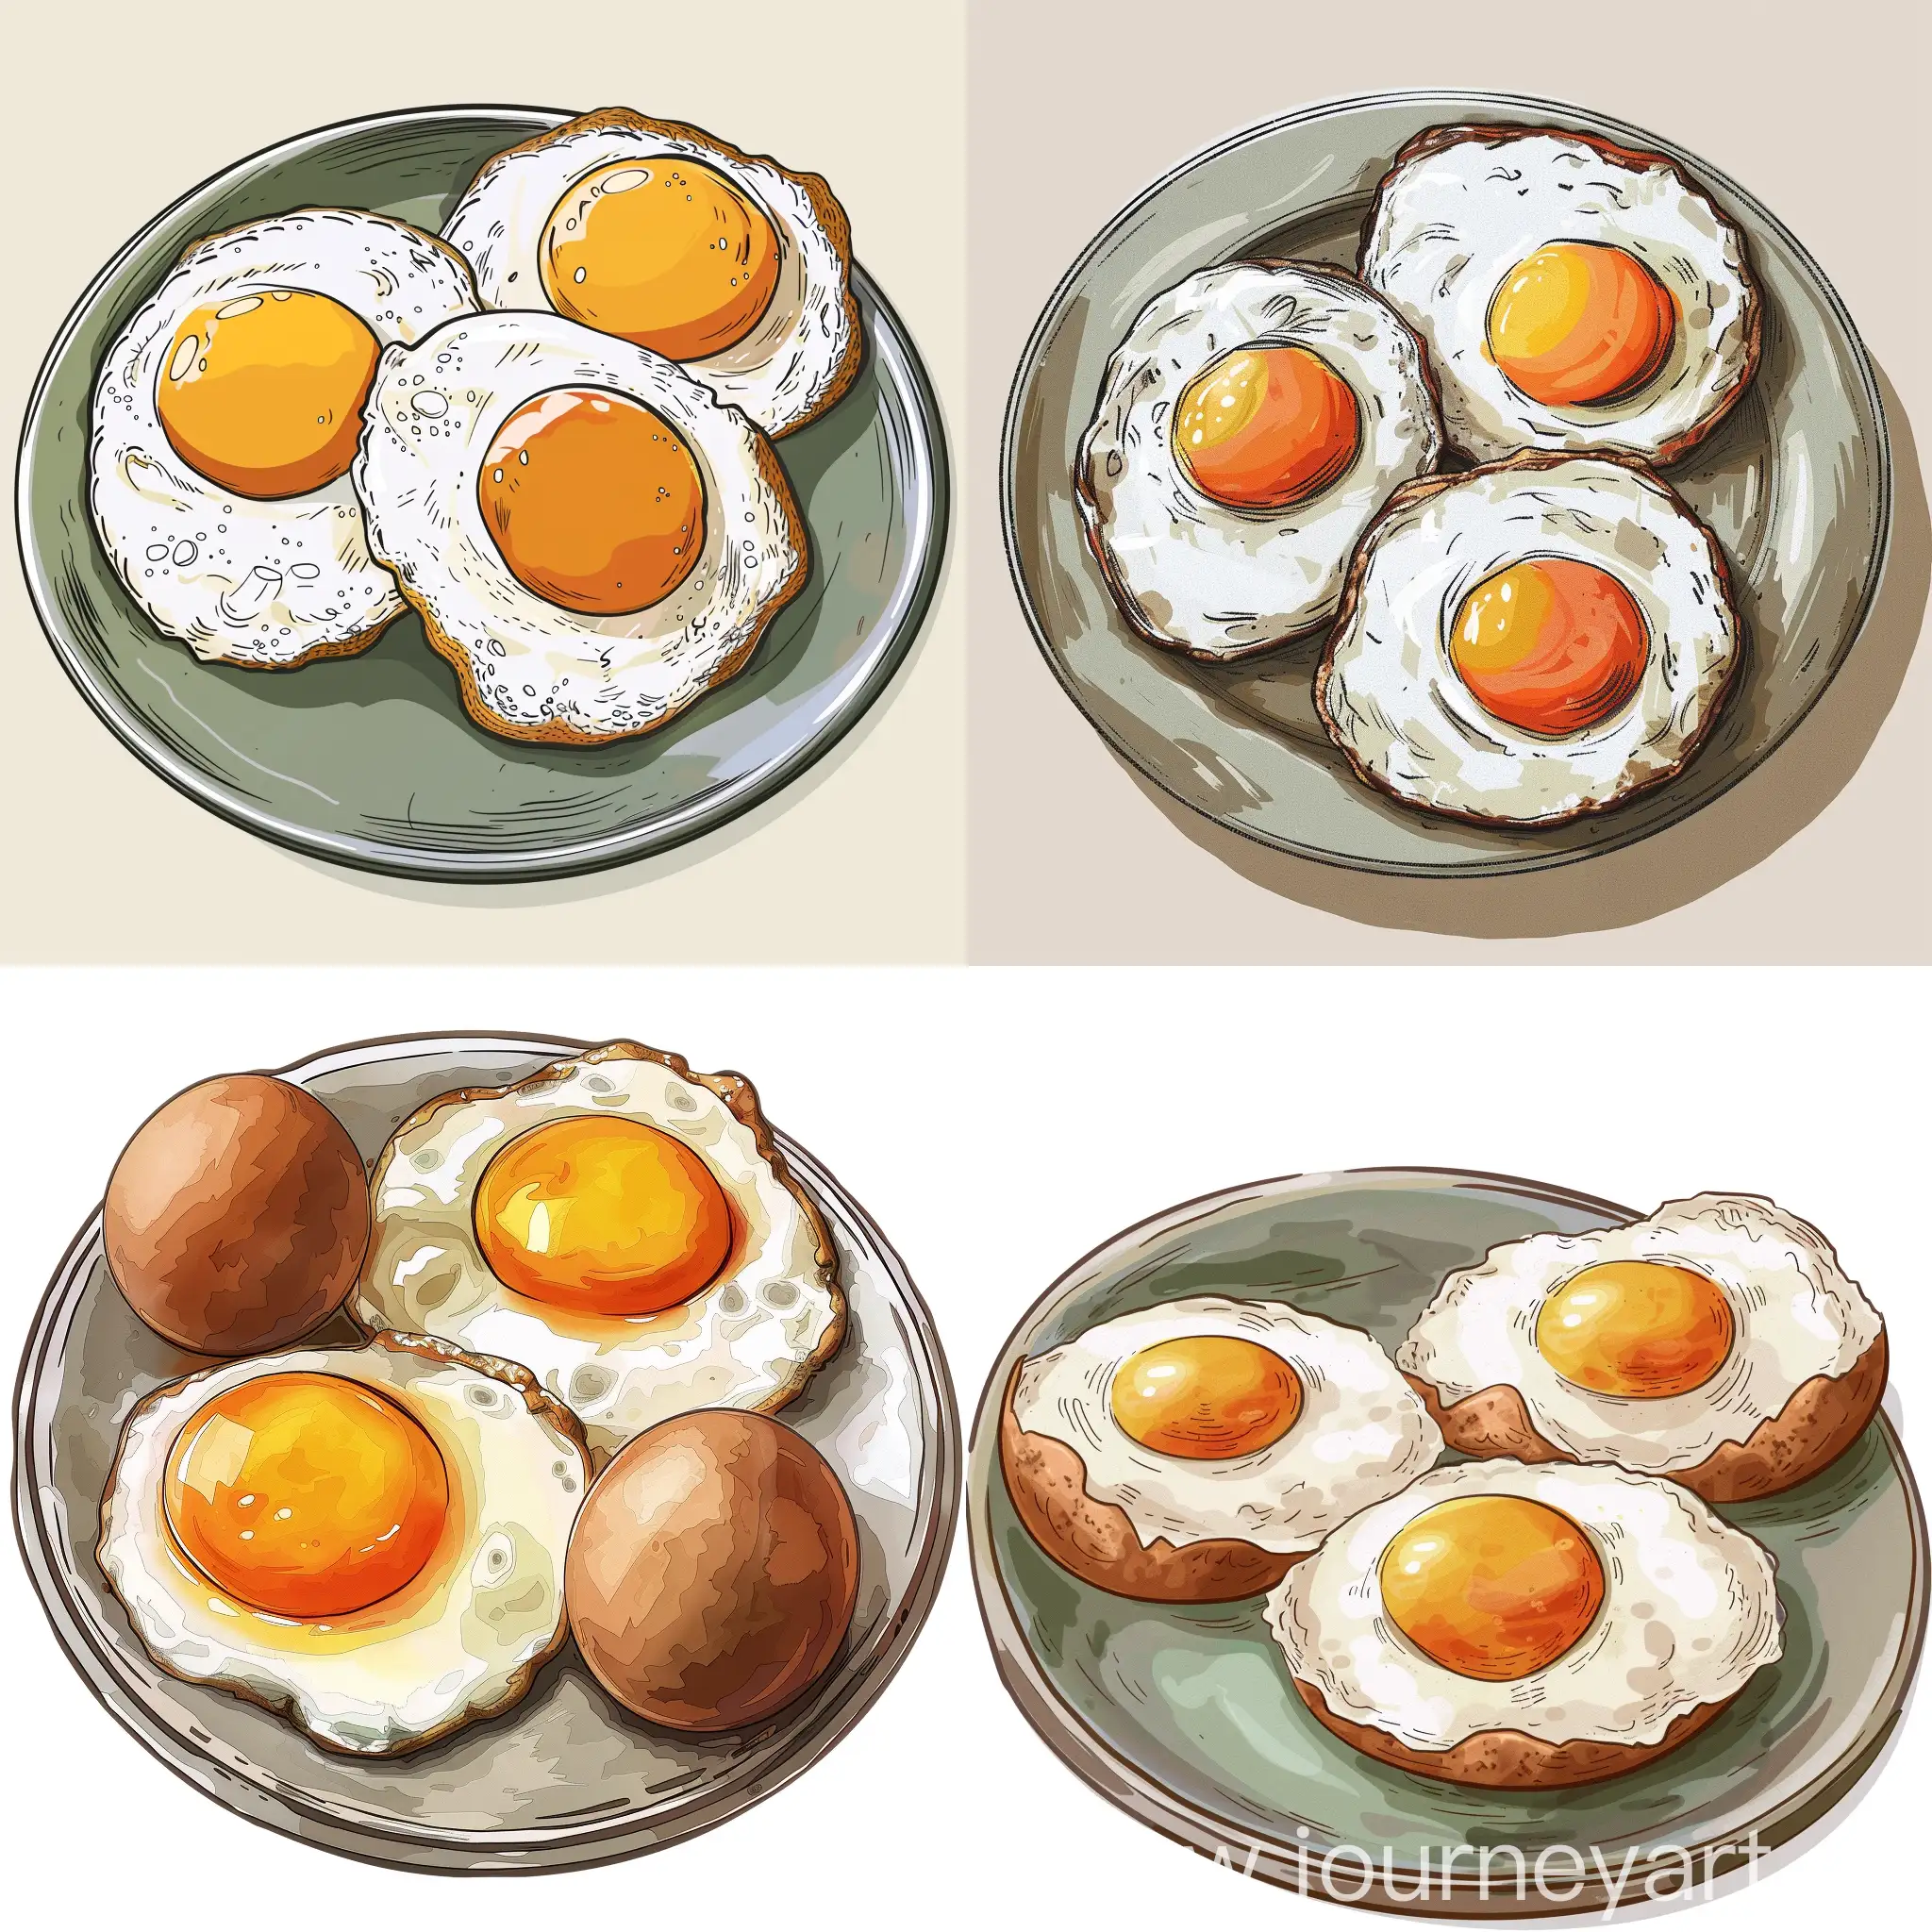 create a picture with food on a plate. 3 fried eggs in a plate